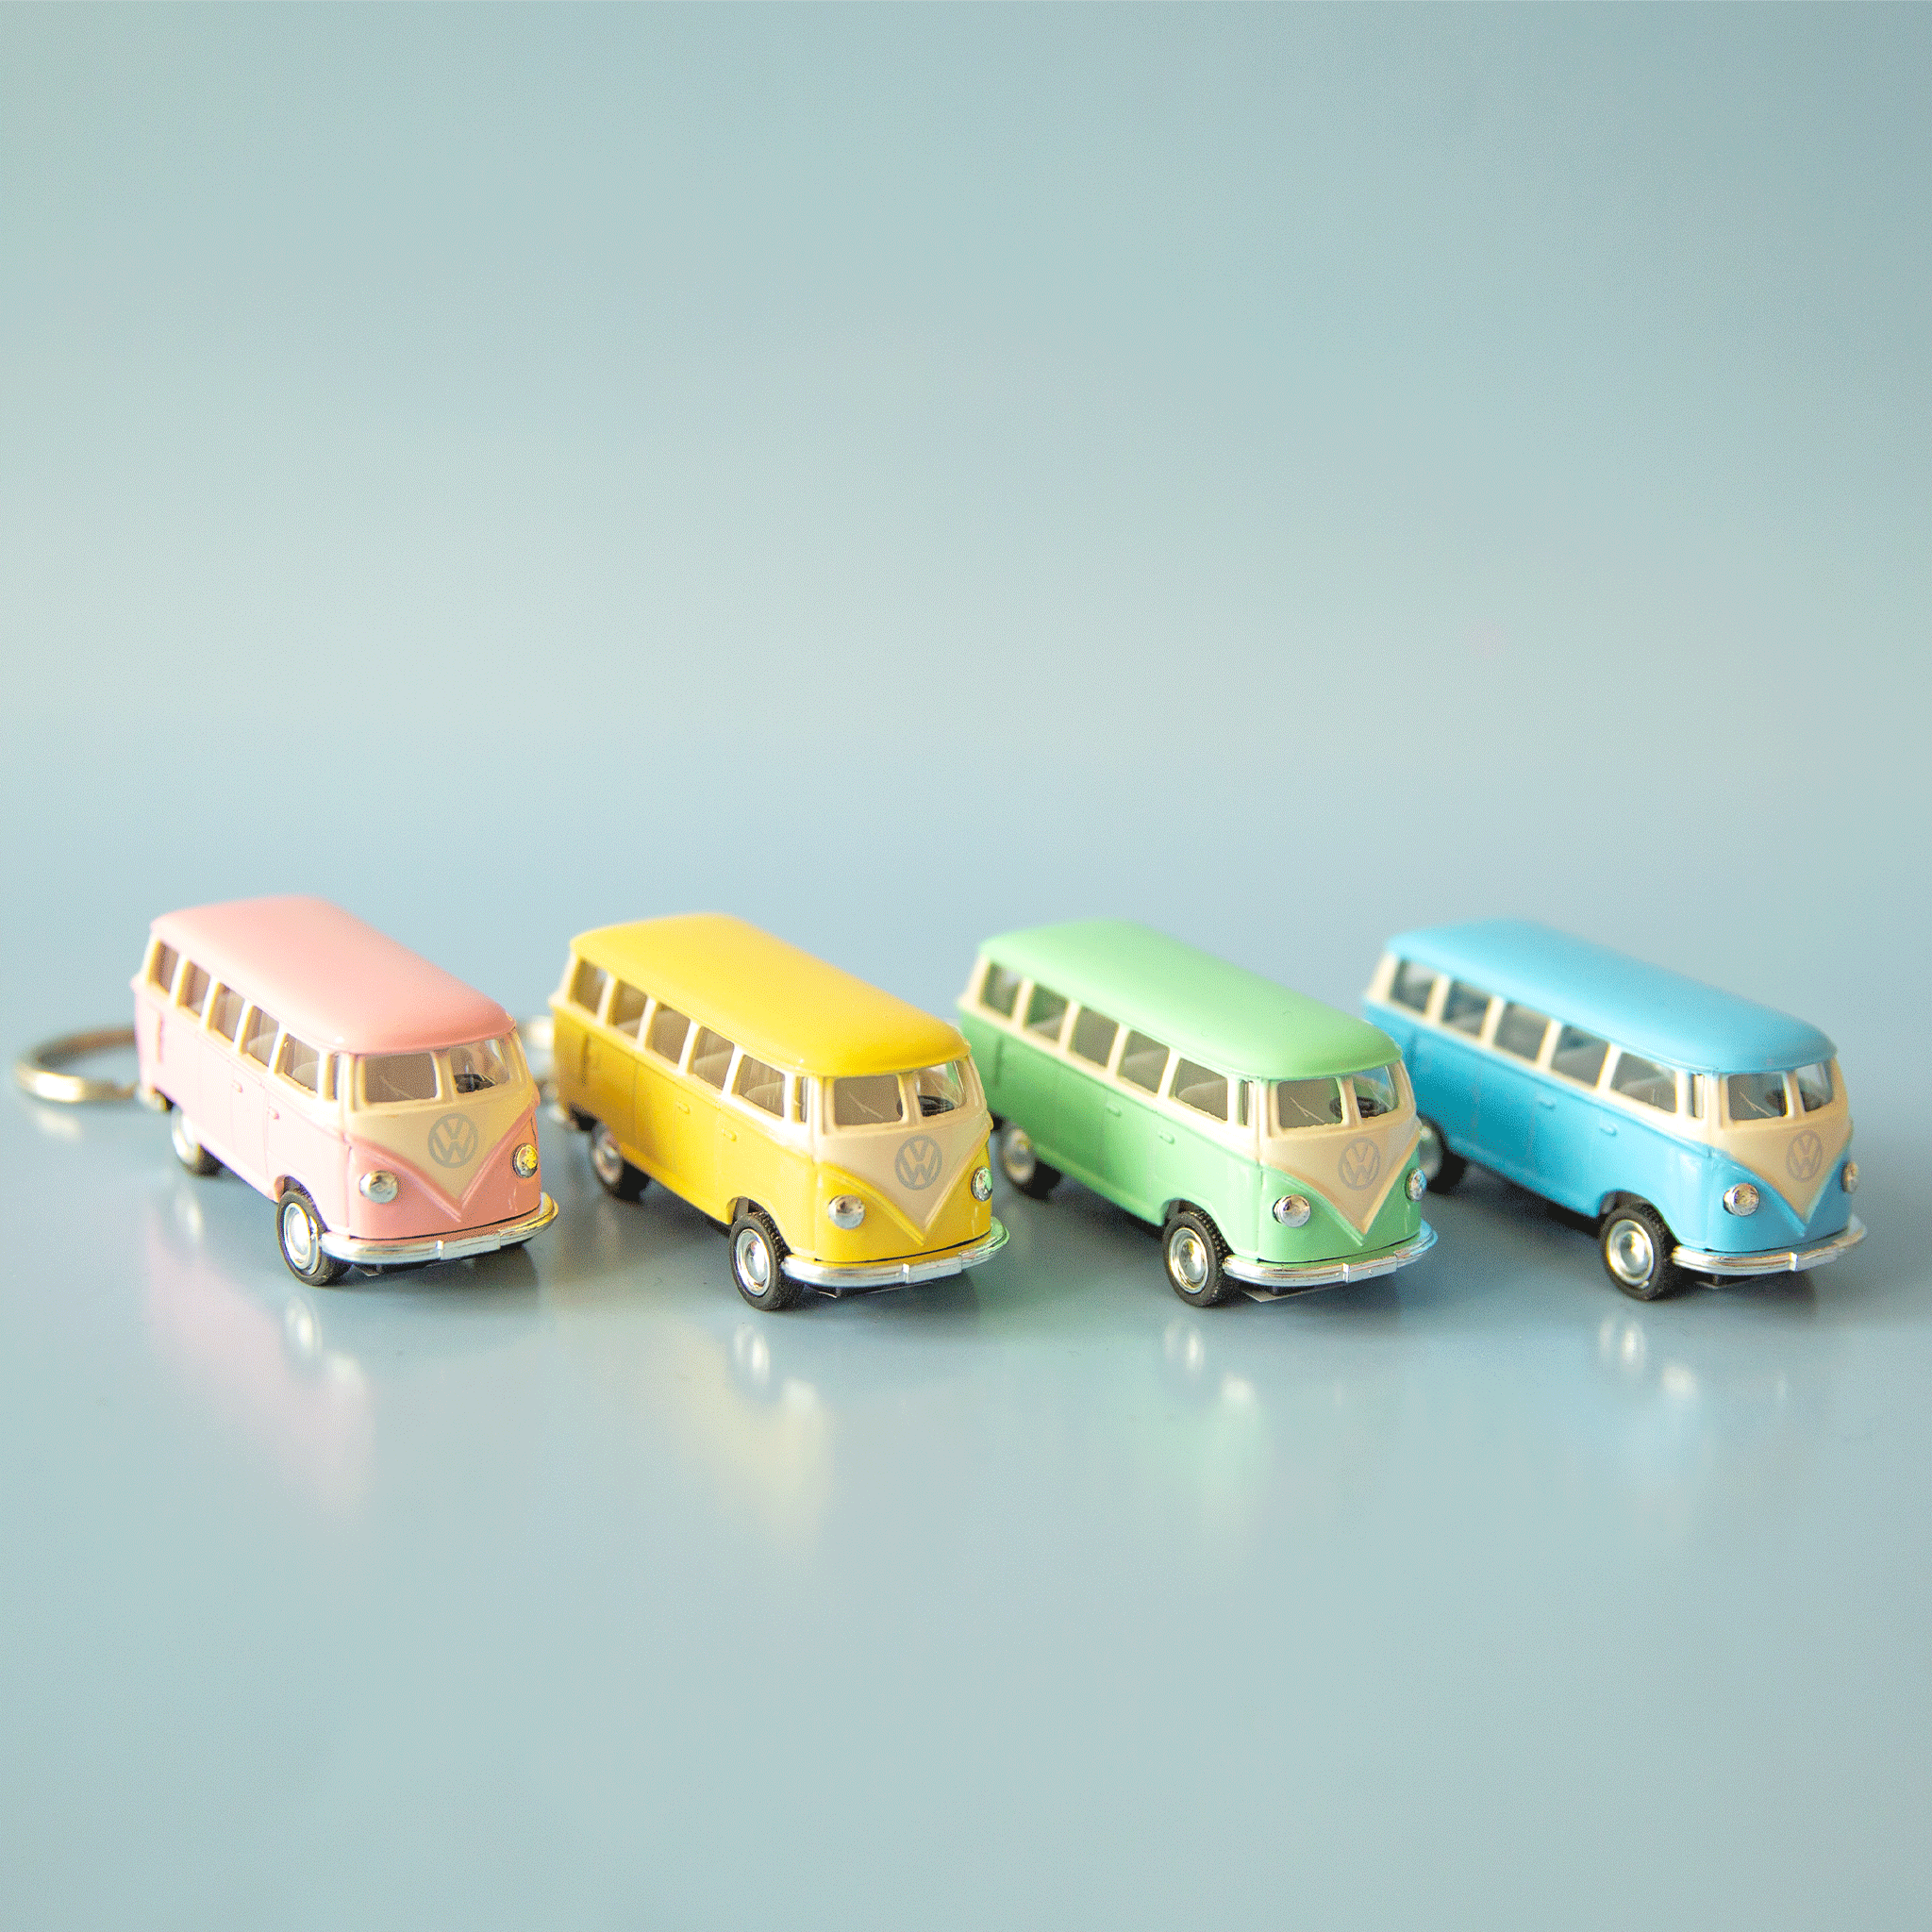 On a blue background is four VW bus shaped keychains in pink, yellow, green and blue. Each color sold separately.